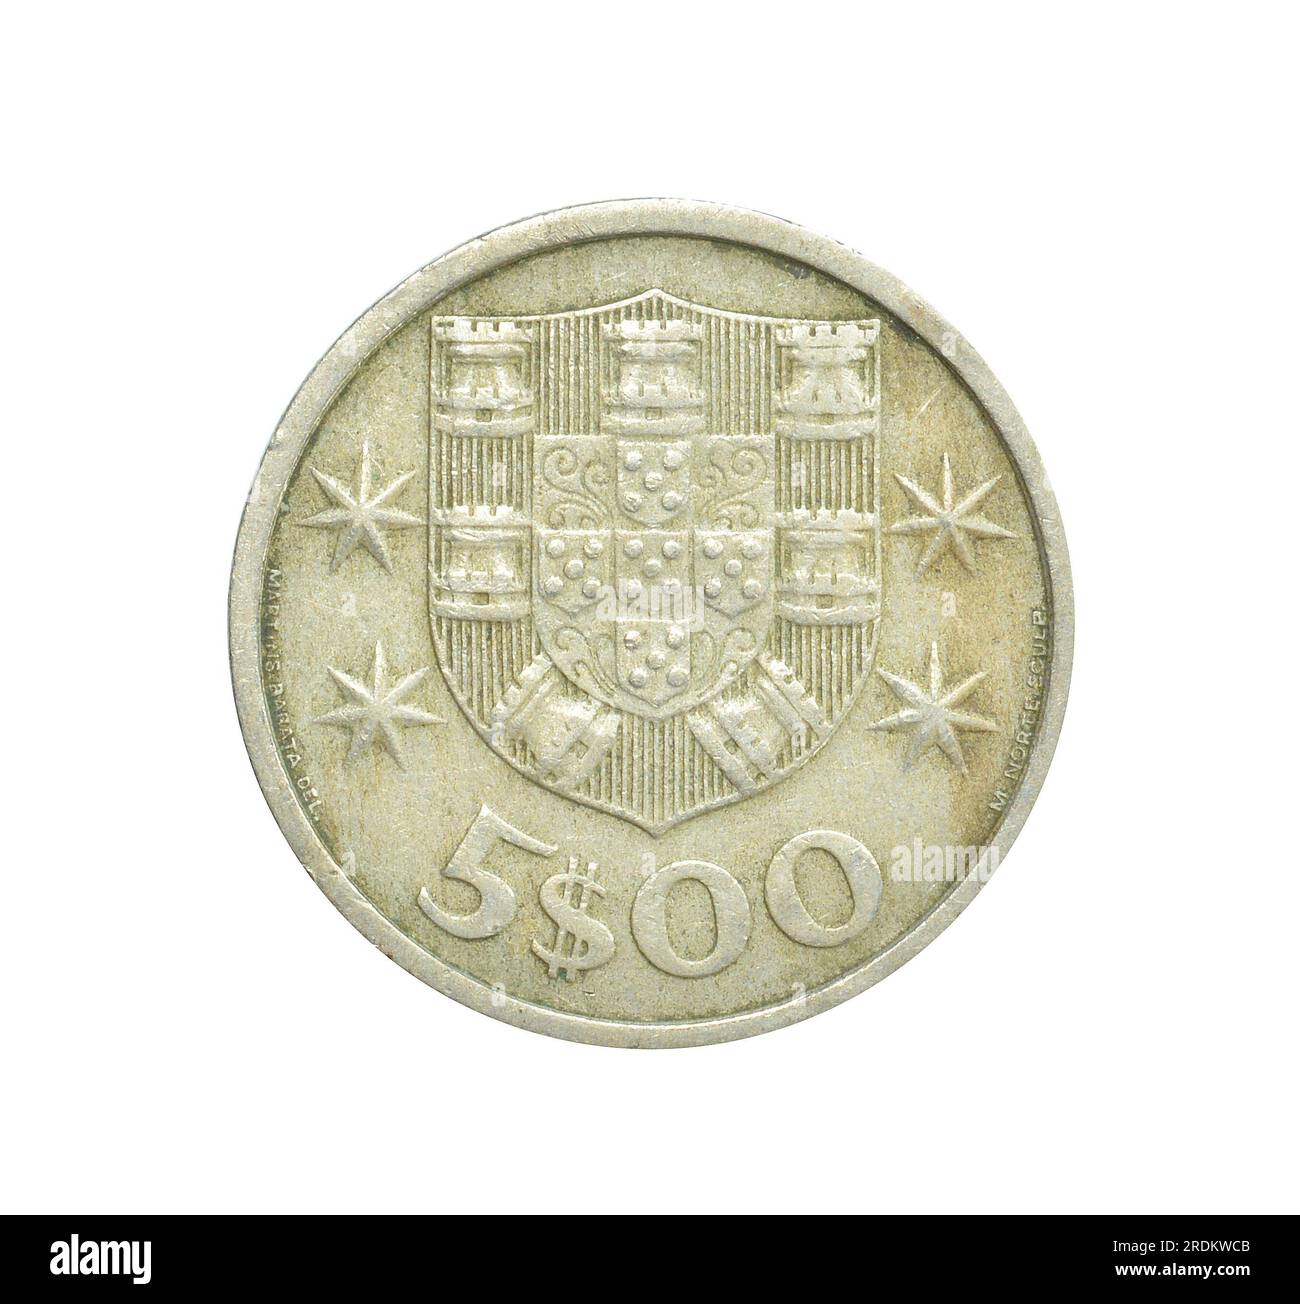 Reverse of 5 escudos coin made by Portugal, that shows Numeral value and Coat of arms Stock Photo